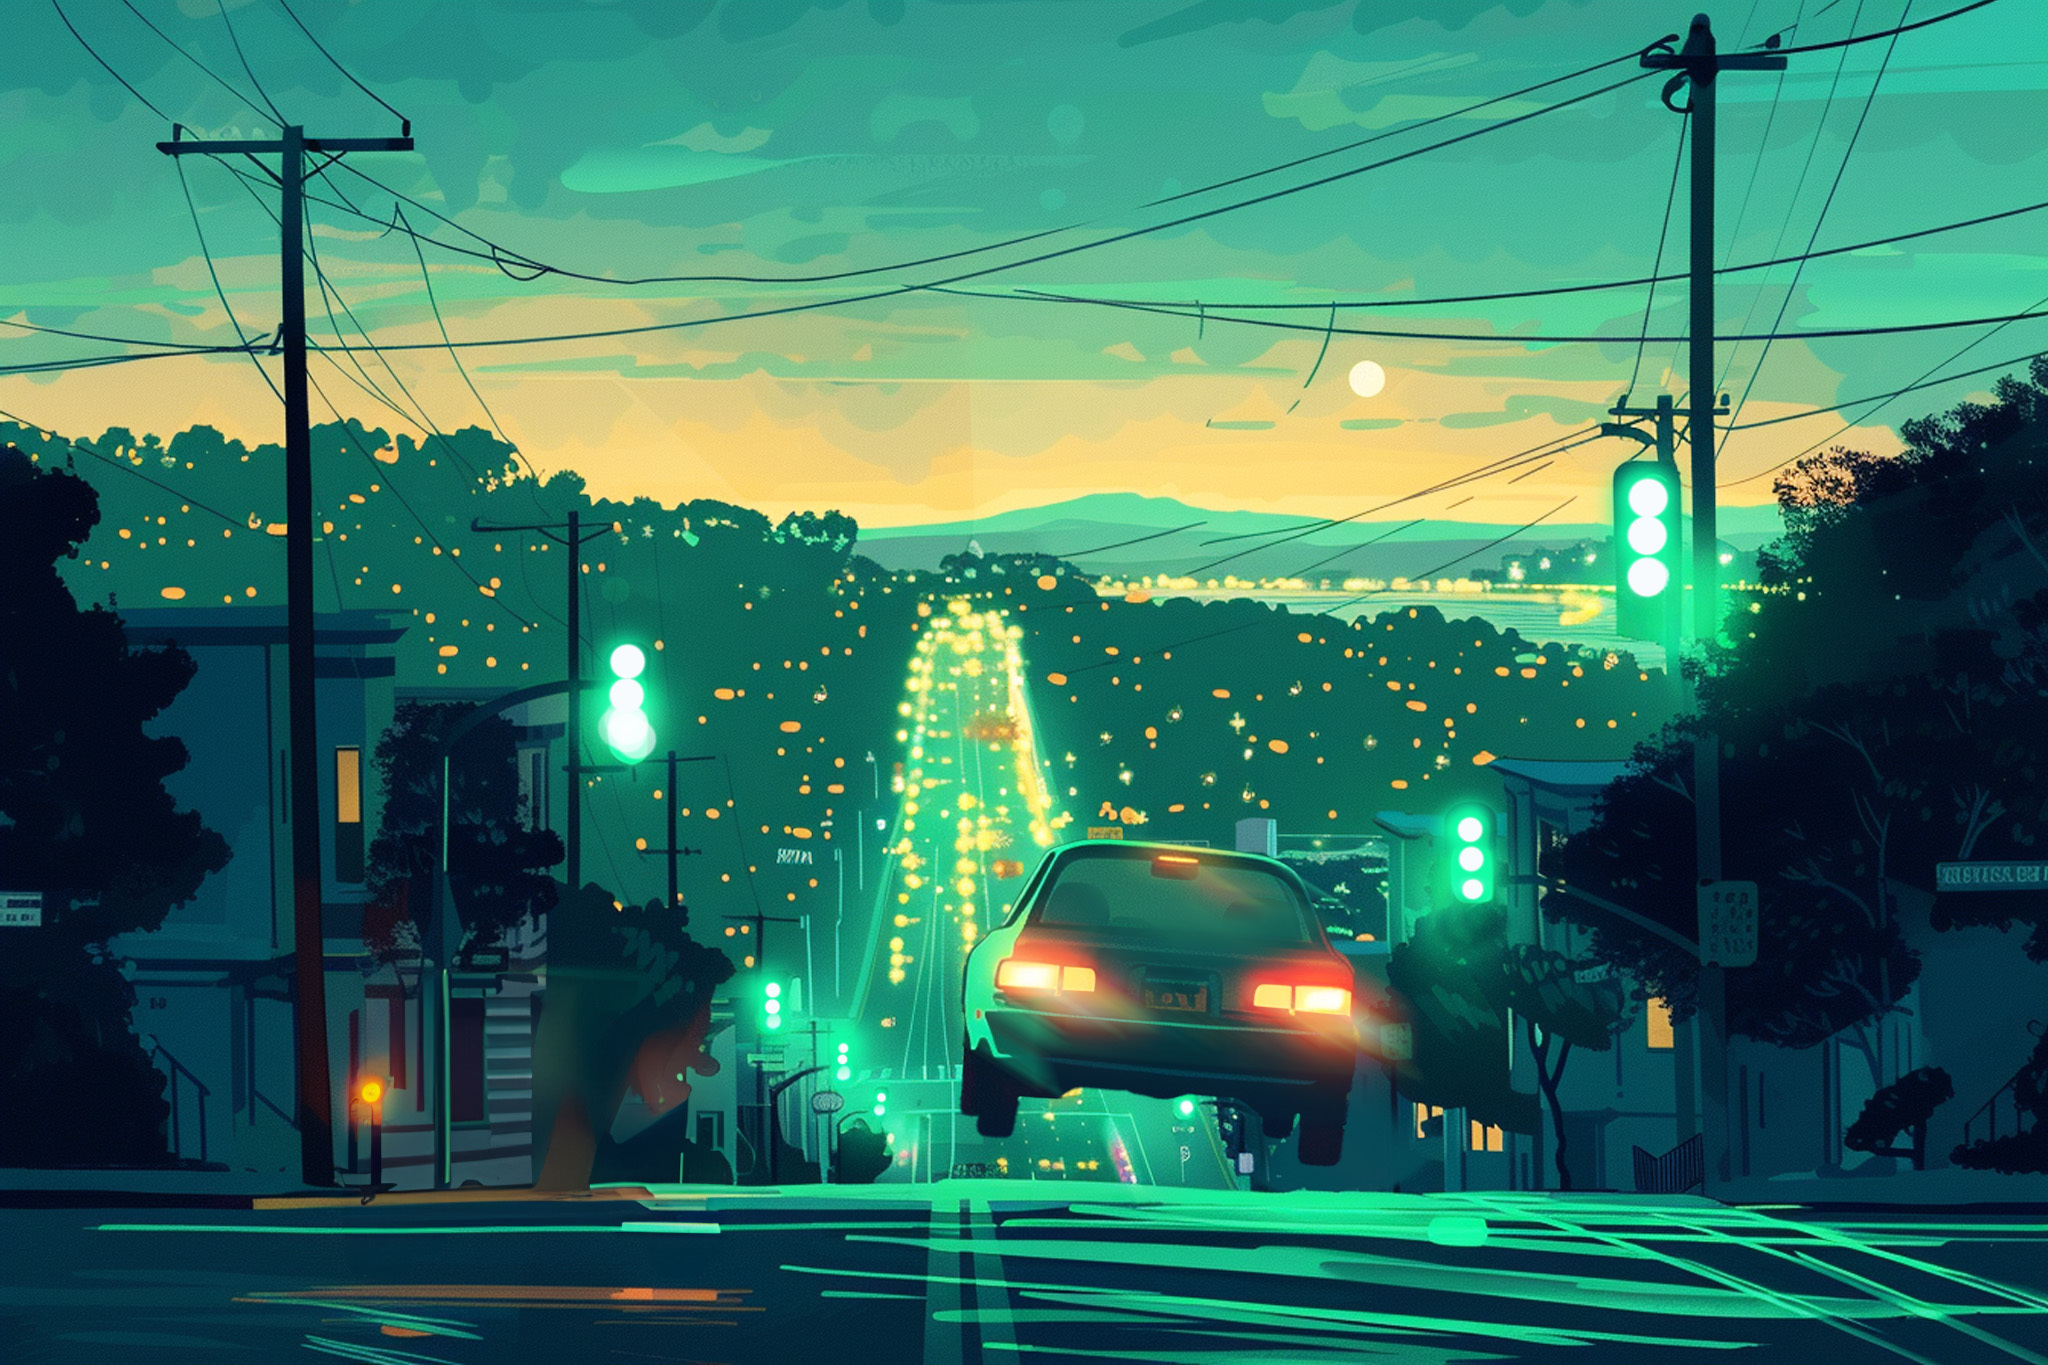 A car drives down a city street at dusk, with green traffic lights and streetlights glowing, leading to a scenic view of a lit-up city and distant hills.